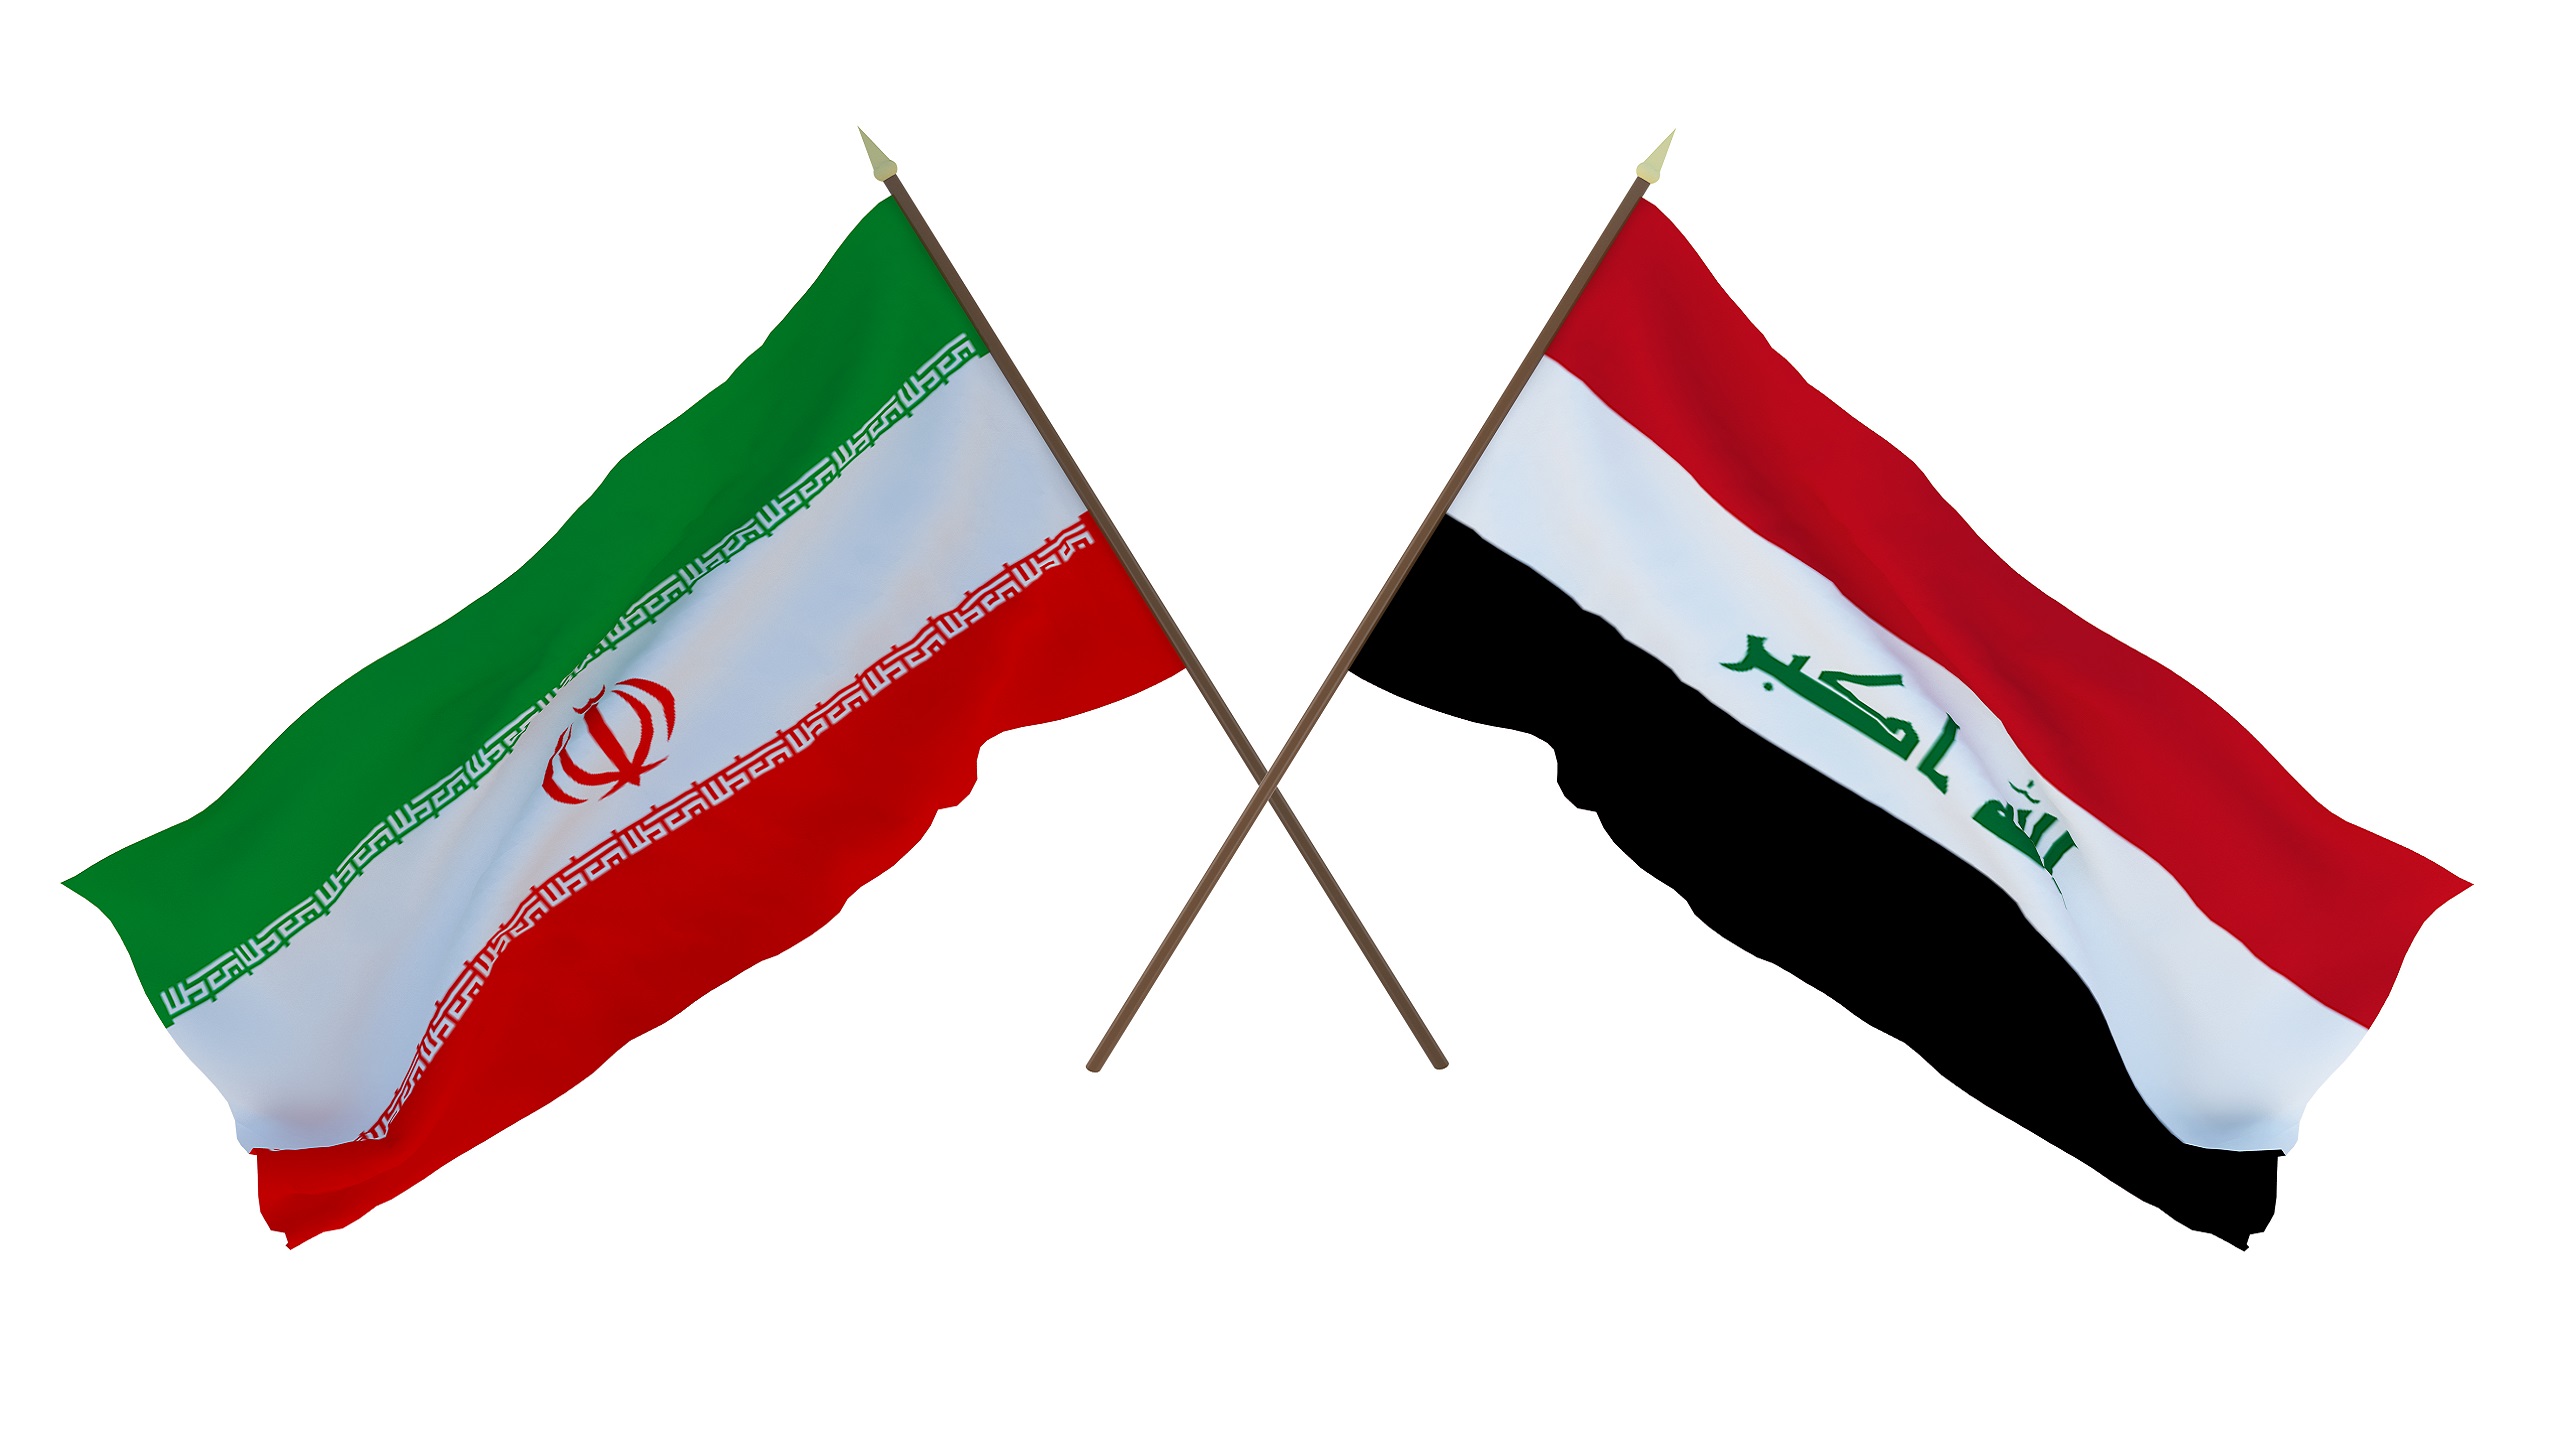 Iran Calls for Strengthened Security Cooperation With Iraq To Counter Kurdish Groups